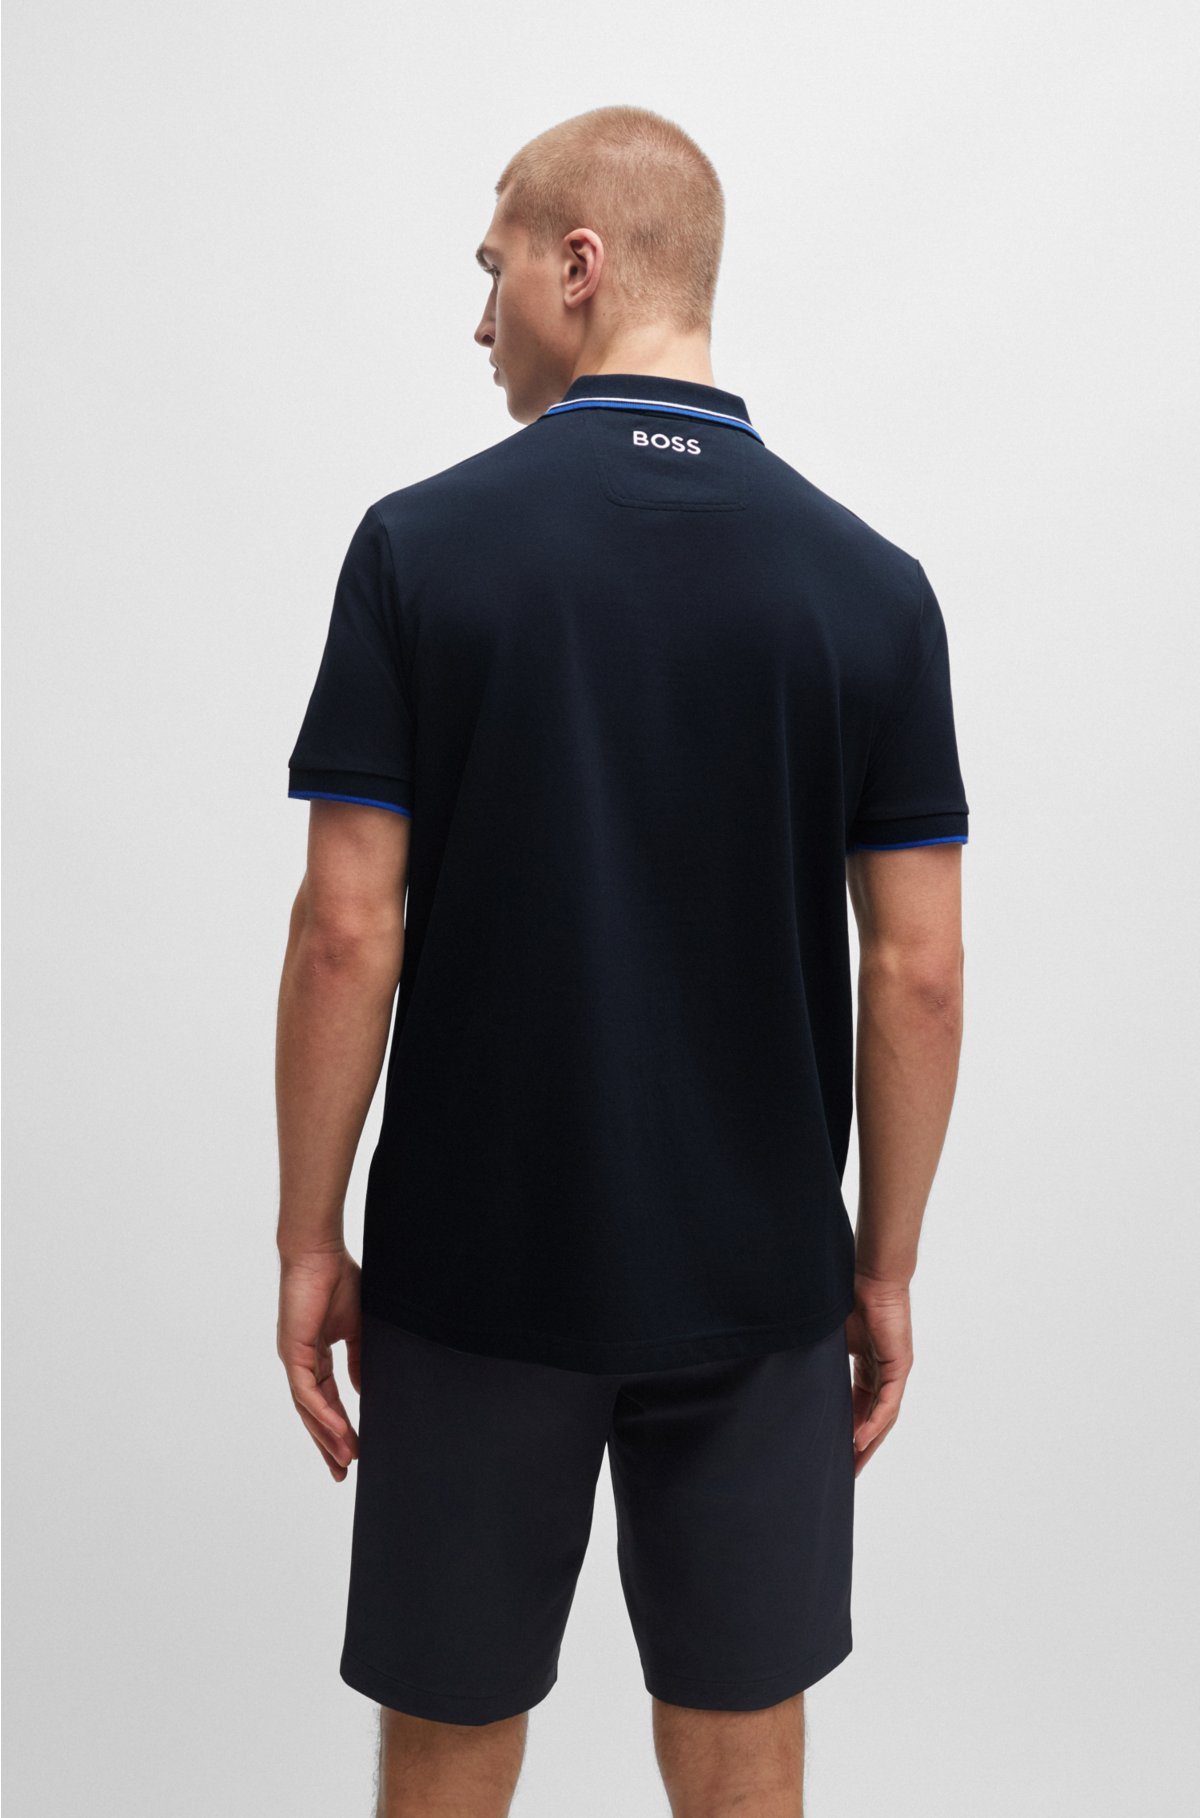 logos shirt BOSS - polo contrast Cotton-blend with